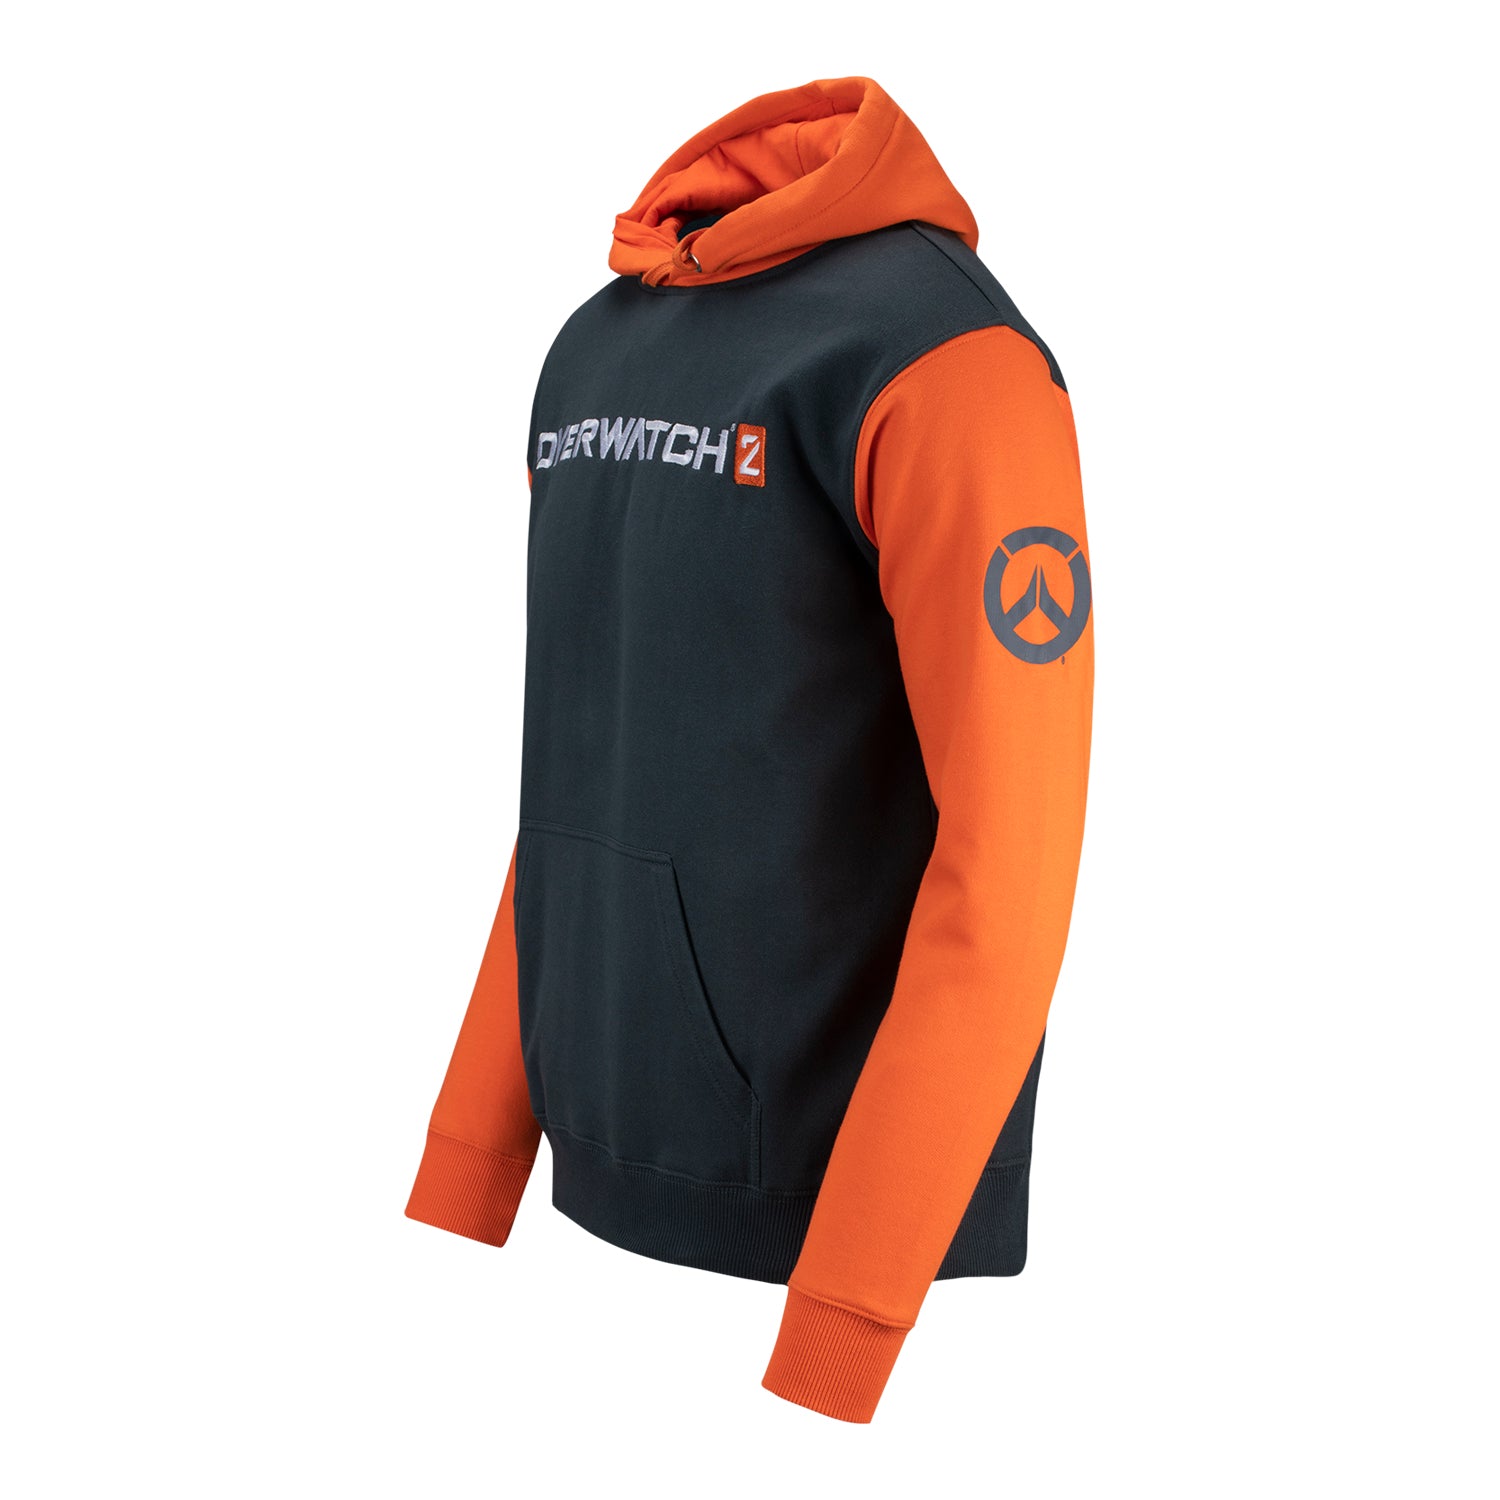 Overwatch 2 Charcoal Colourblock Hoodie - Front Left Side View